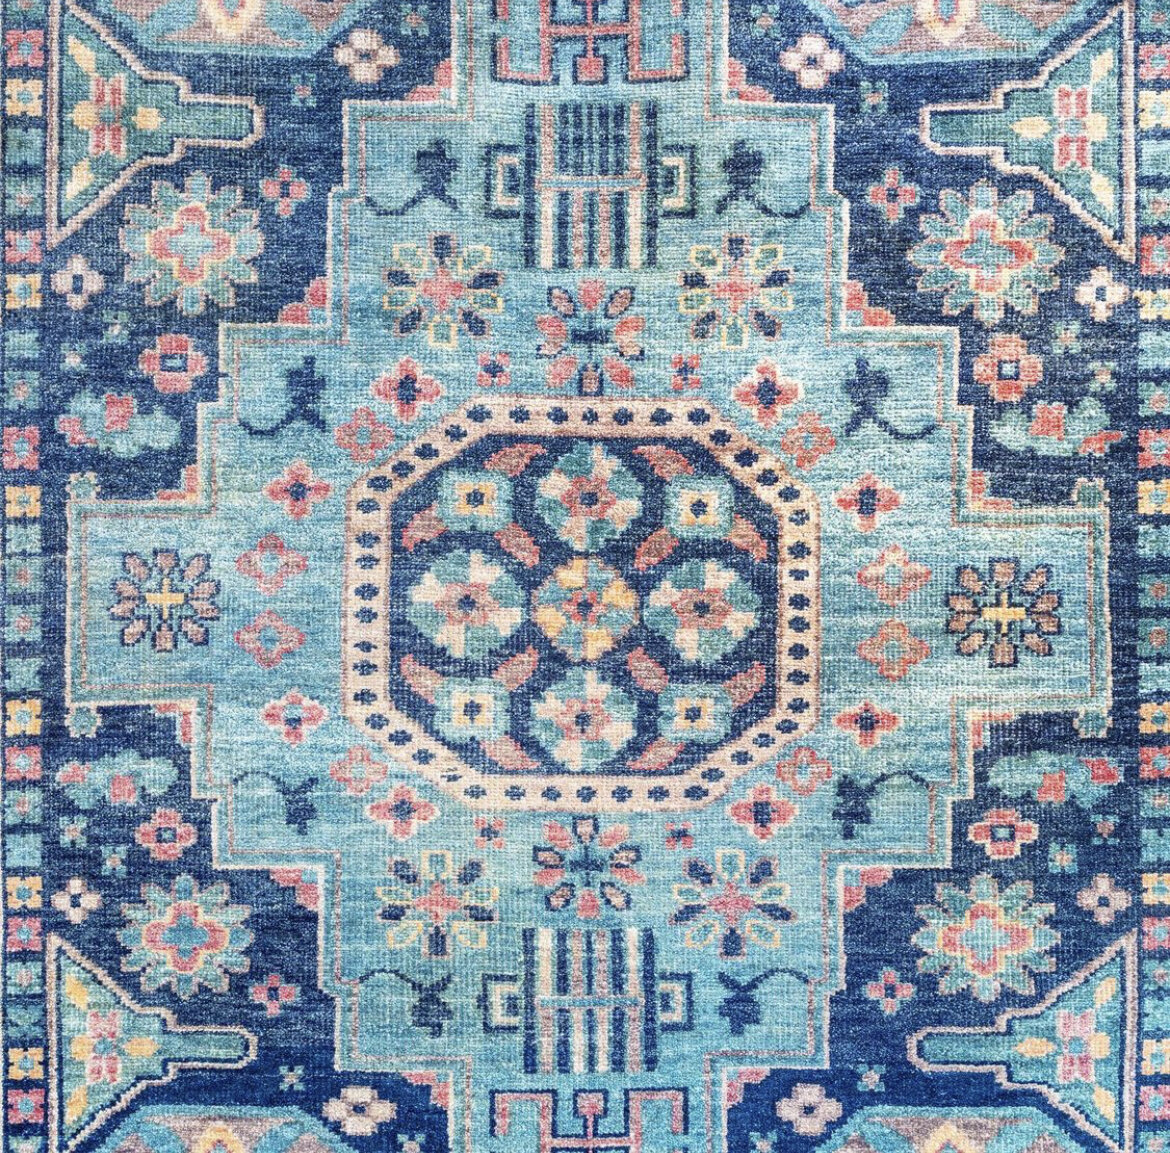 Rug sold by The Rug Gallery